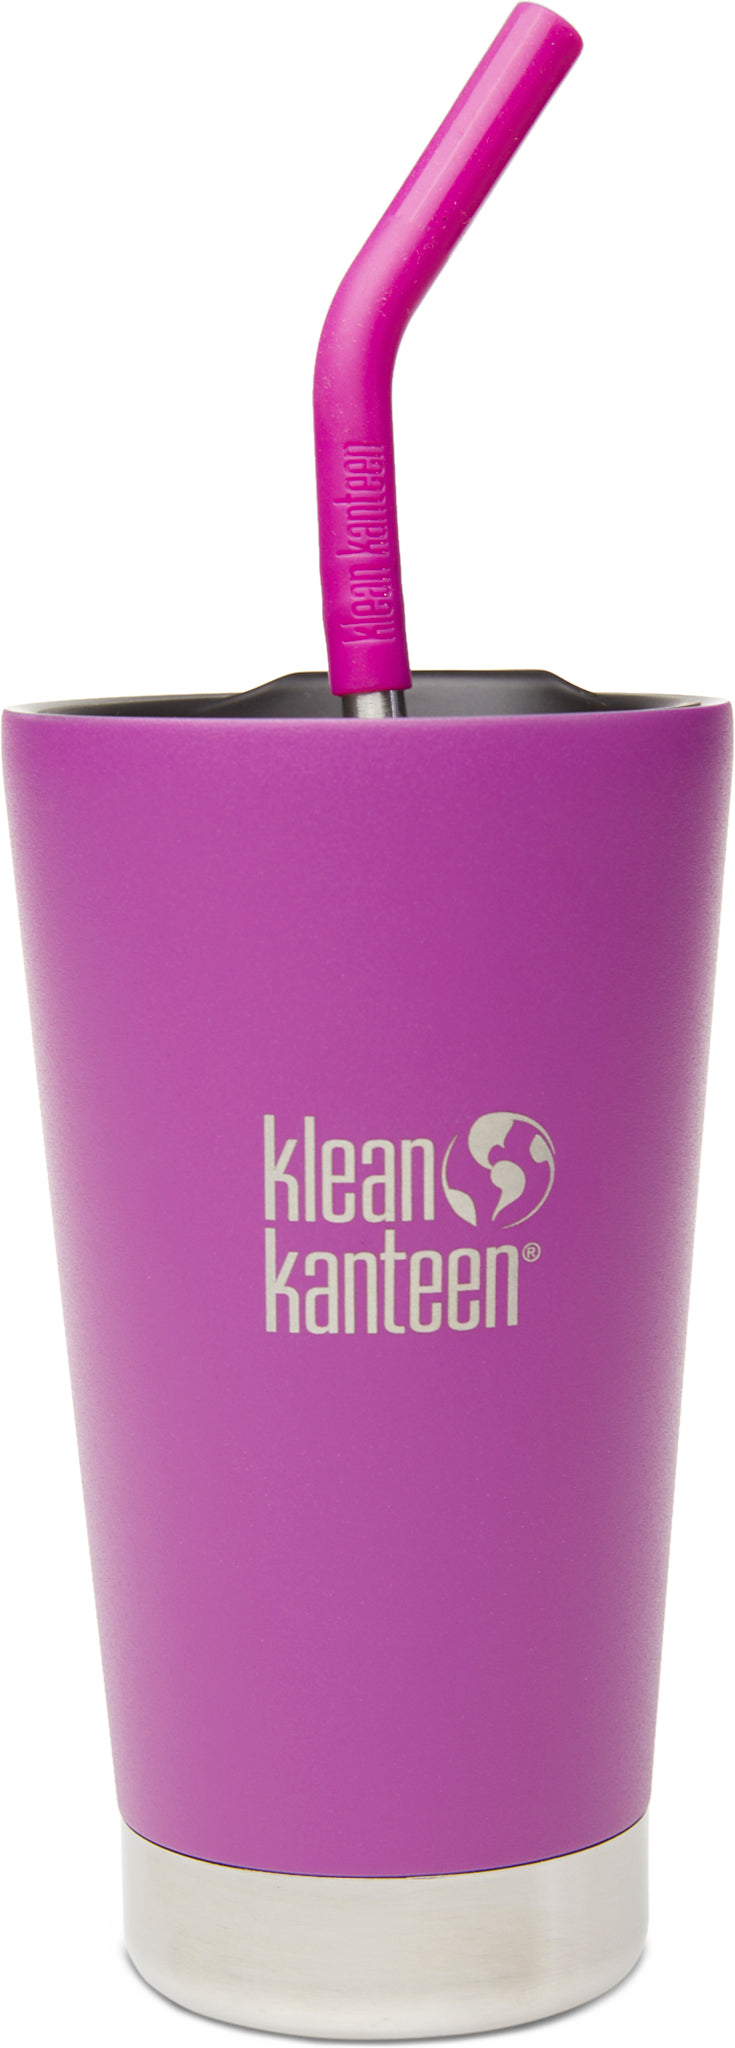 Klean Kanteen Emerald Bay Insulated 16oz Tumbler with Straw Lid